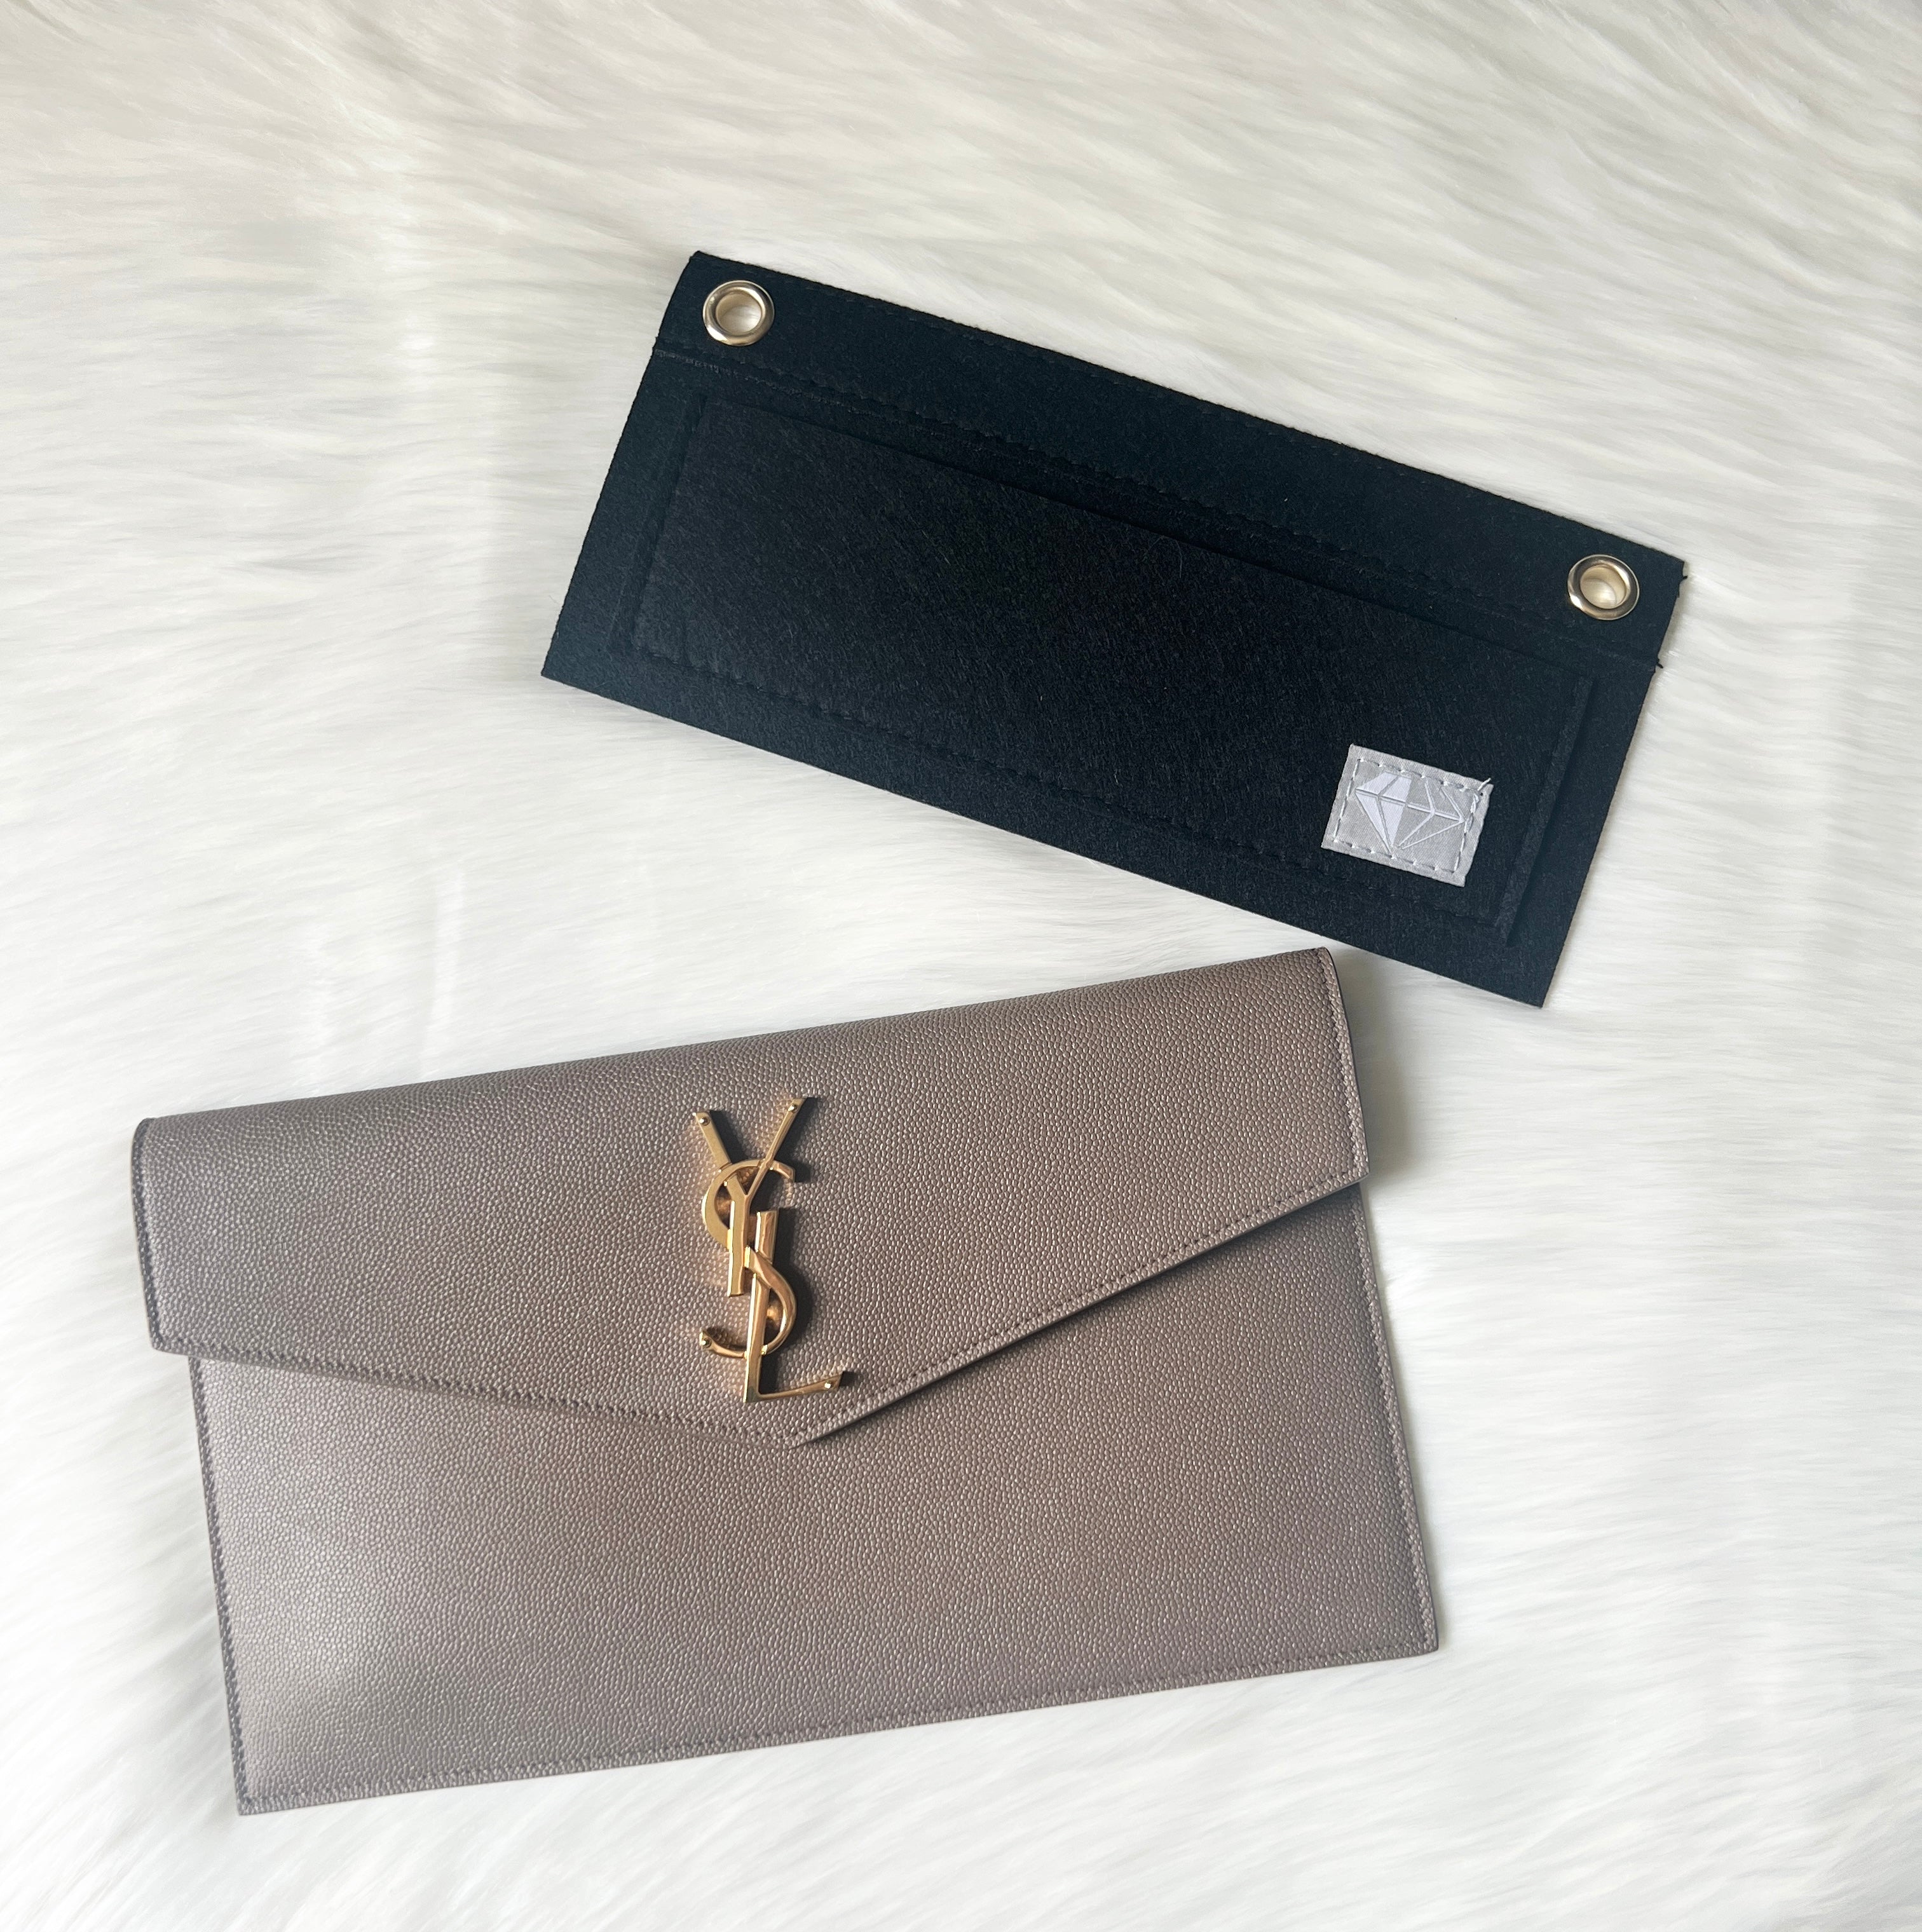  YESIKIMI UPTOWN Envelope Clutch Conversion Kit Premium Felt  Inset With 120cm Chain : Clothing, Shoes & Jewelry